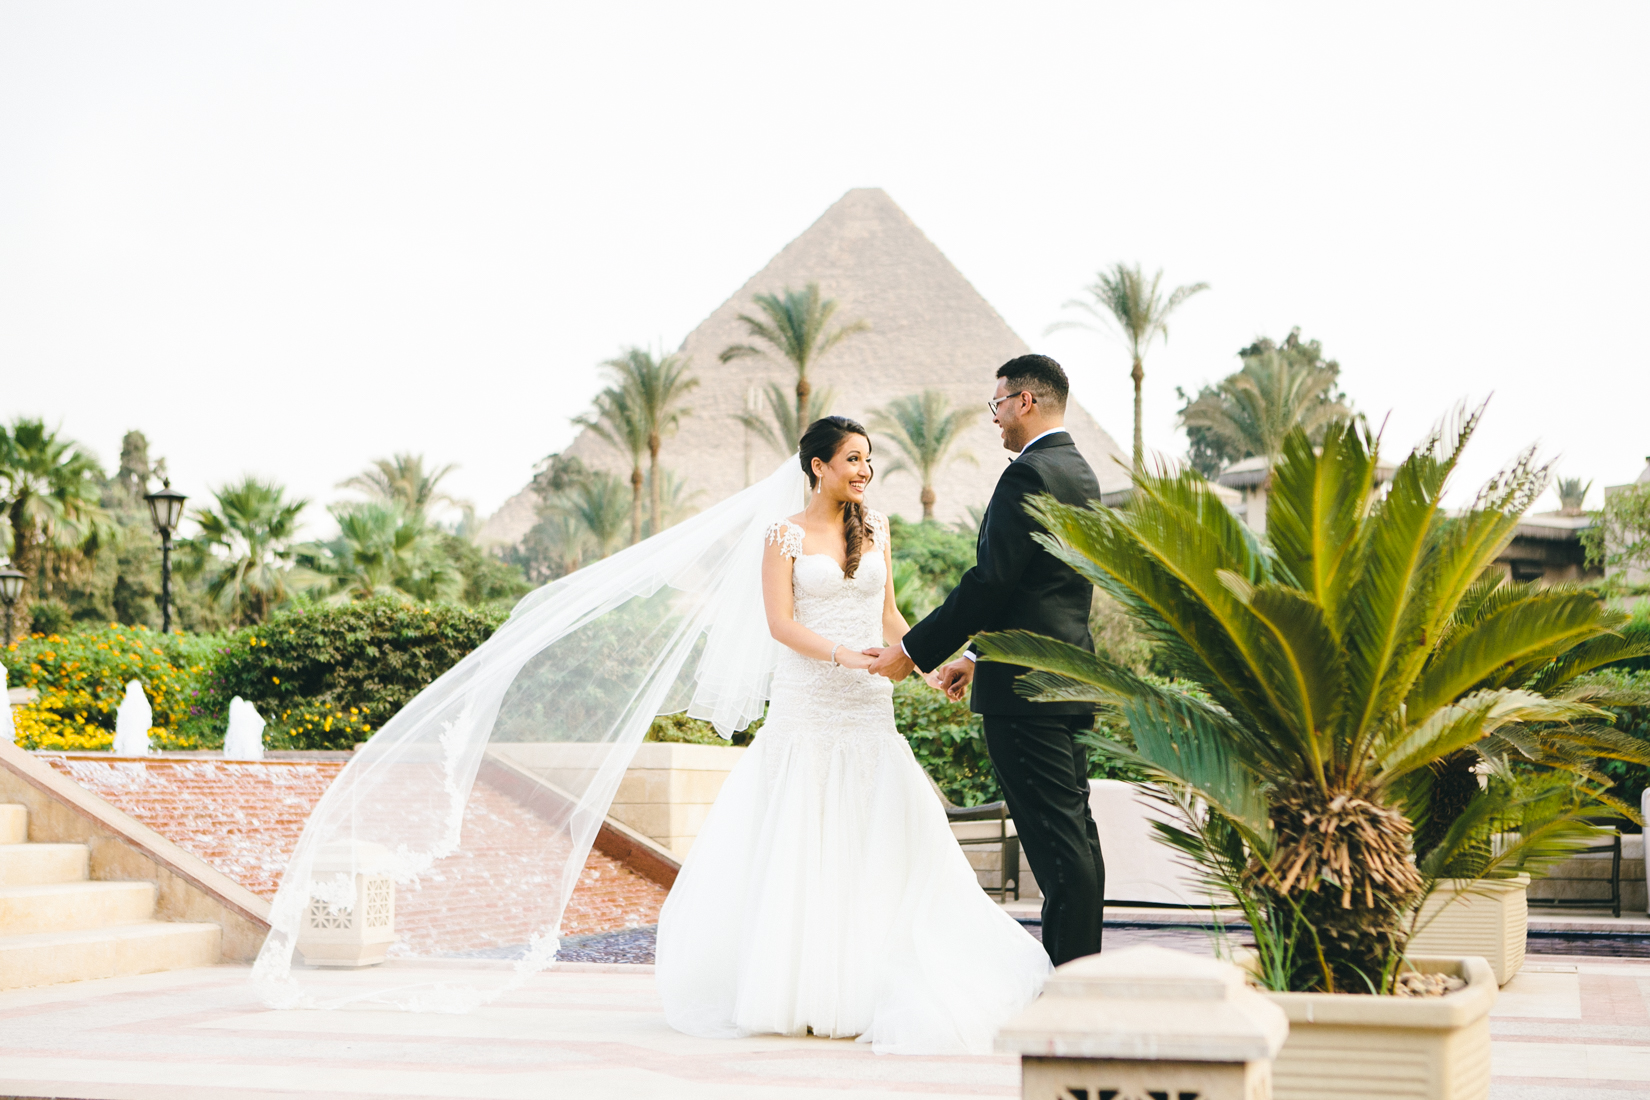 8 Wedding Venues in Cairo, Egypt to Make You Wish For a Destination Wedding There